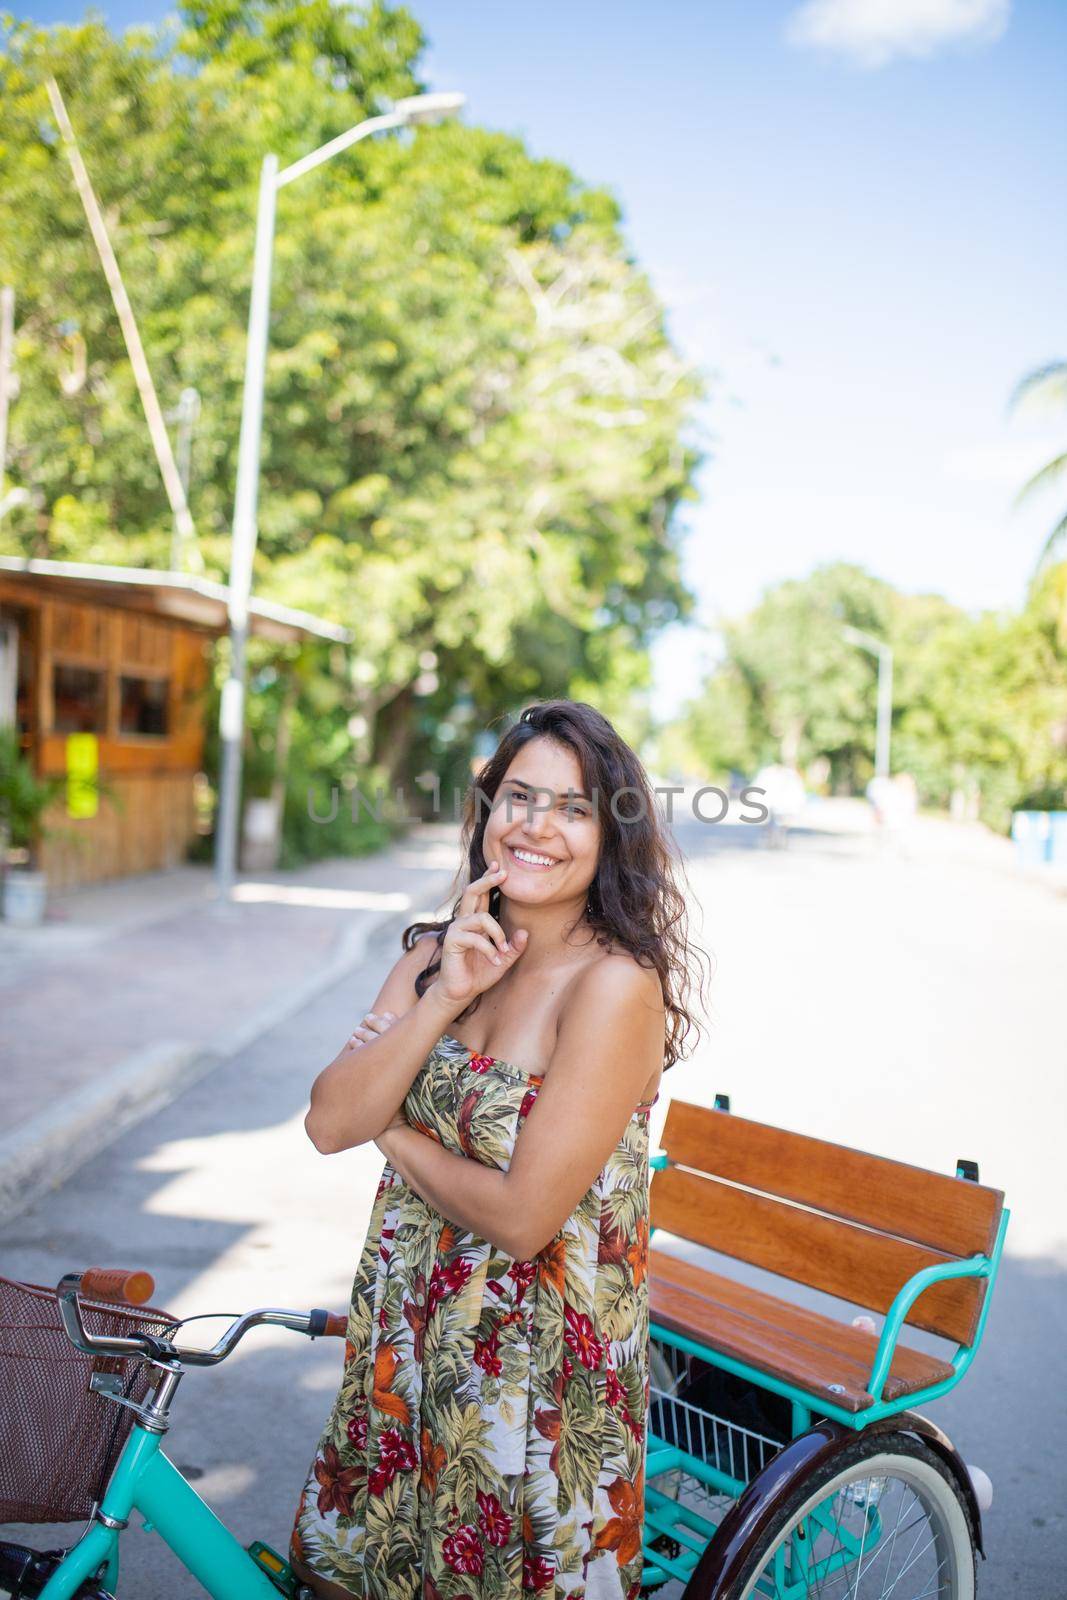 Beautiful smiling woman wearing flowered dress and riding adult tricycle with trees as background. Portrait of woman riding bike in empy street. Bike ride on sunny day